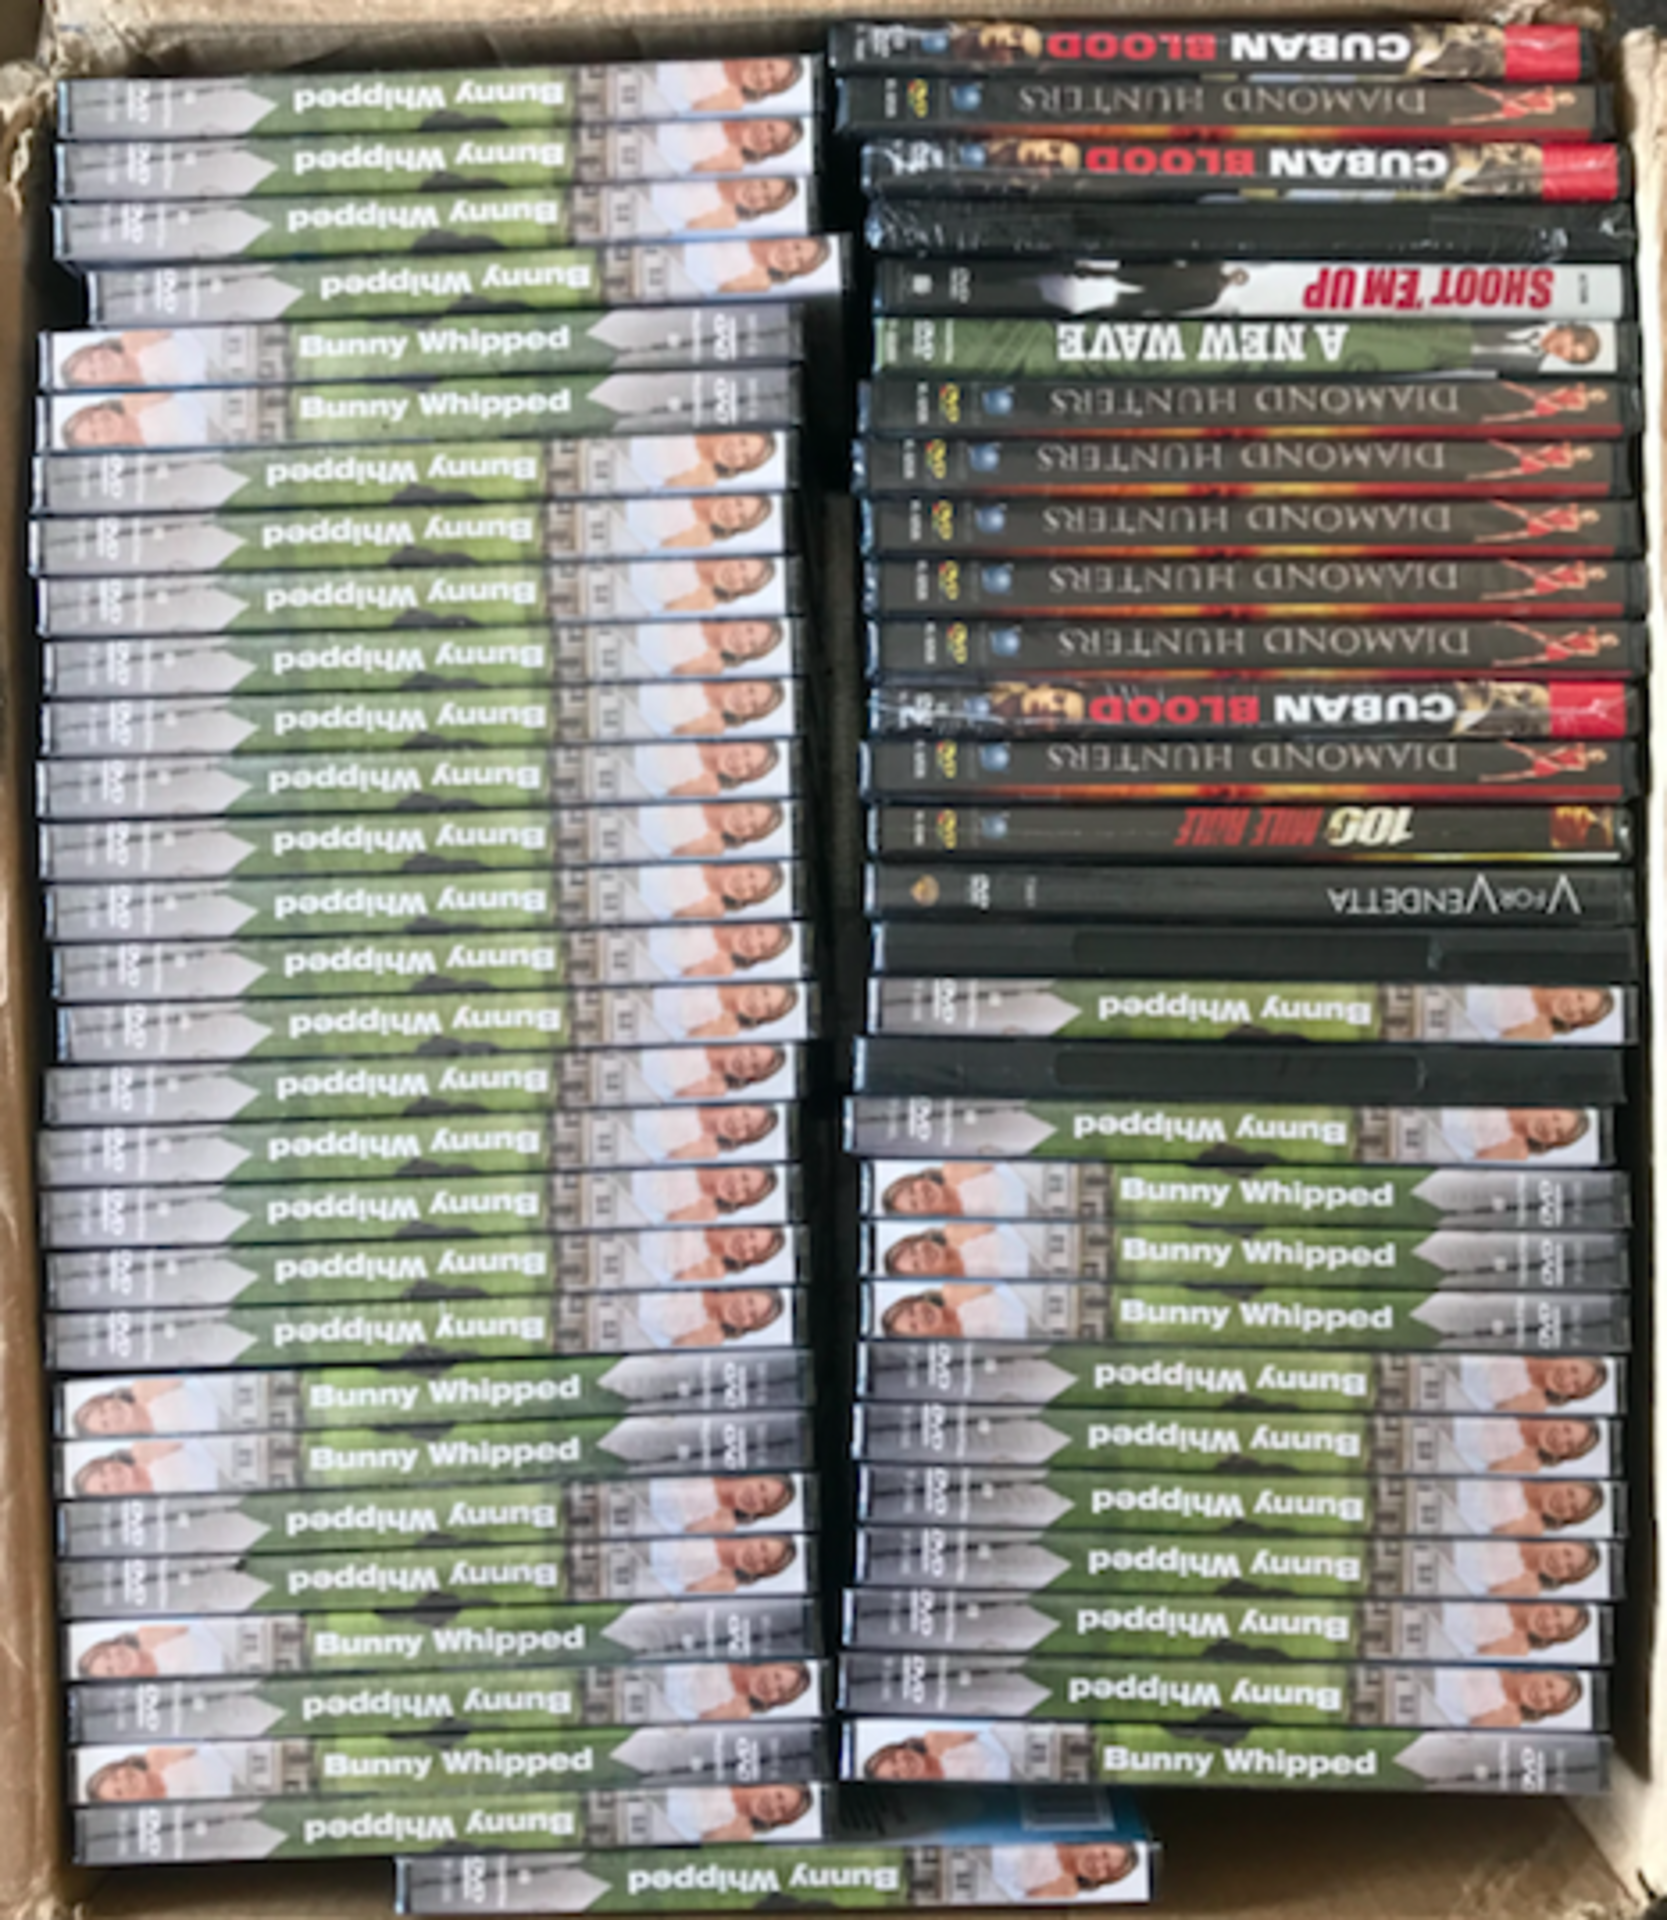 LOT OF OVER 120 BRAND NEW UNOPENED DVD MOVIES, IDEAL FOR DVD STORE RETAILER